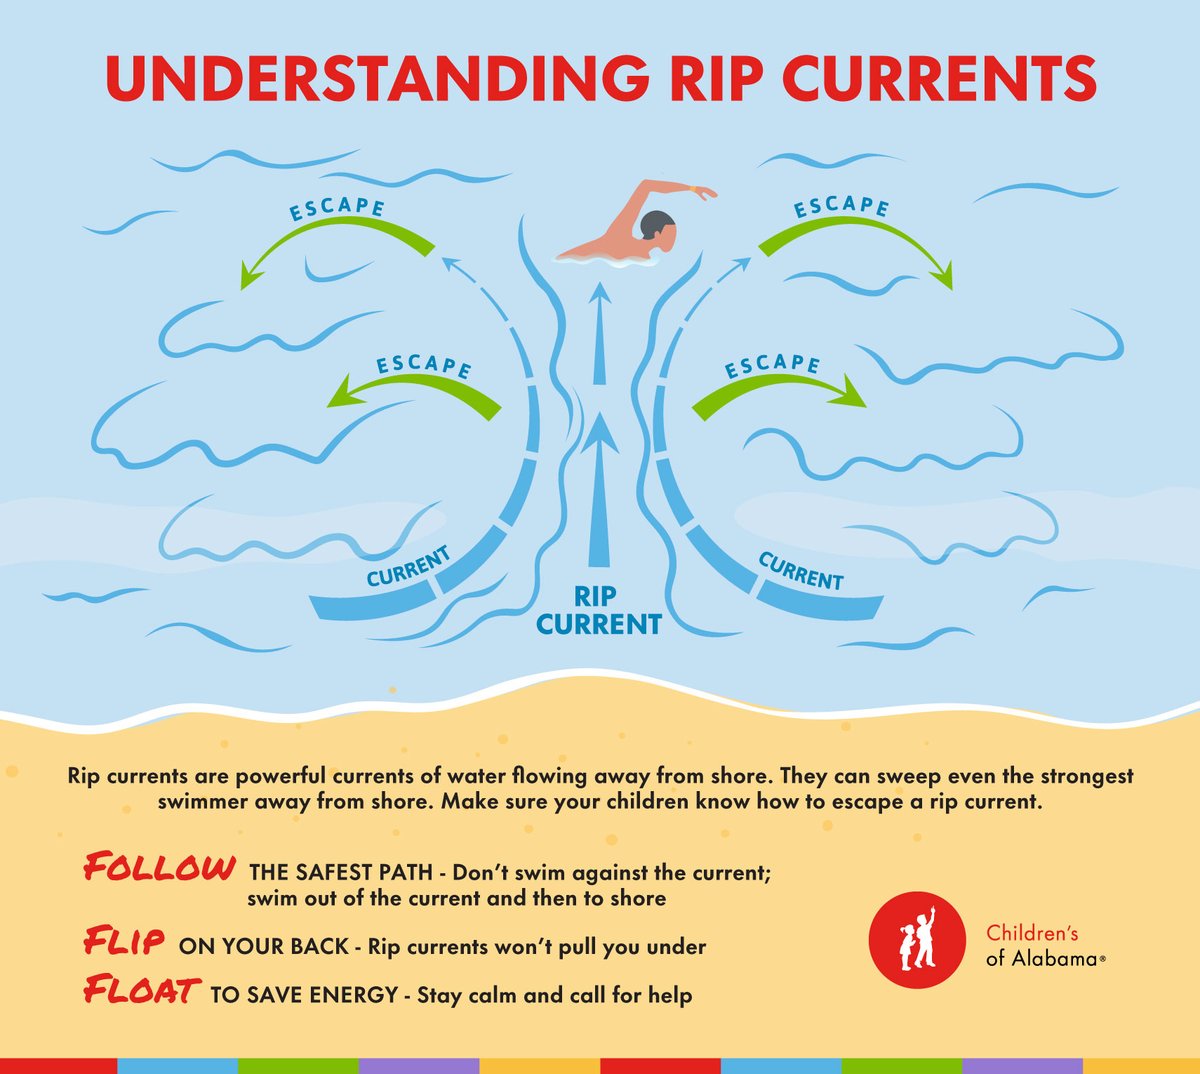 As you head to the beach this summer, be sure to #BeachSmart and follow local authorities' beach warning flags. 

It's especially important for your children to know how to escape a rip current. Click the graphic to learn more. @NOAA @NWSMobile @City_GulfShores @cityorangebeach